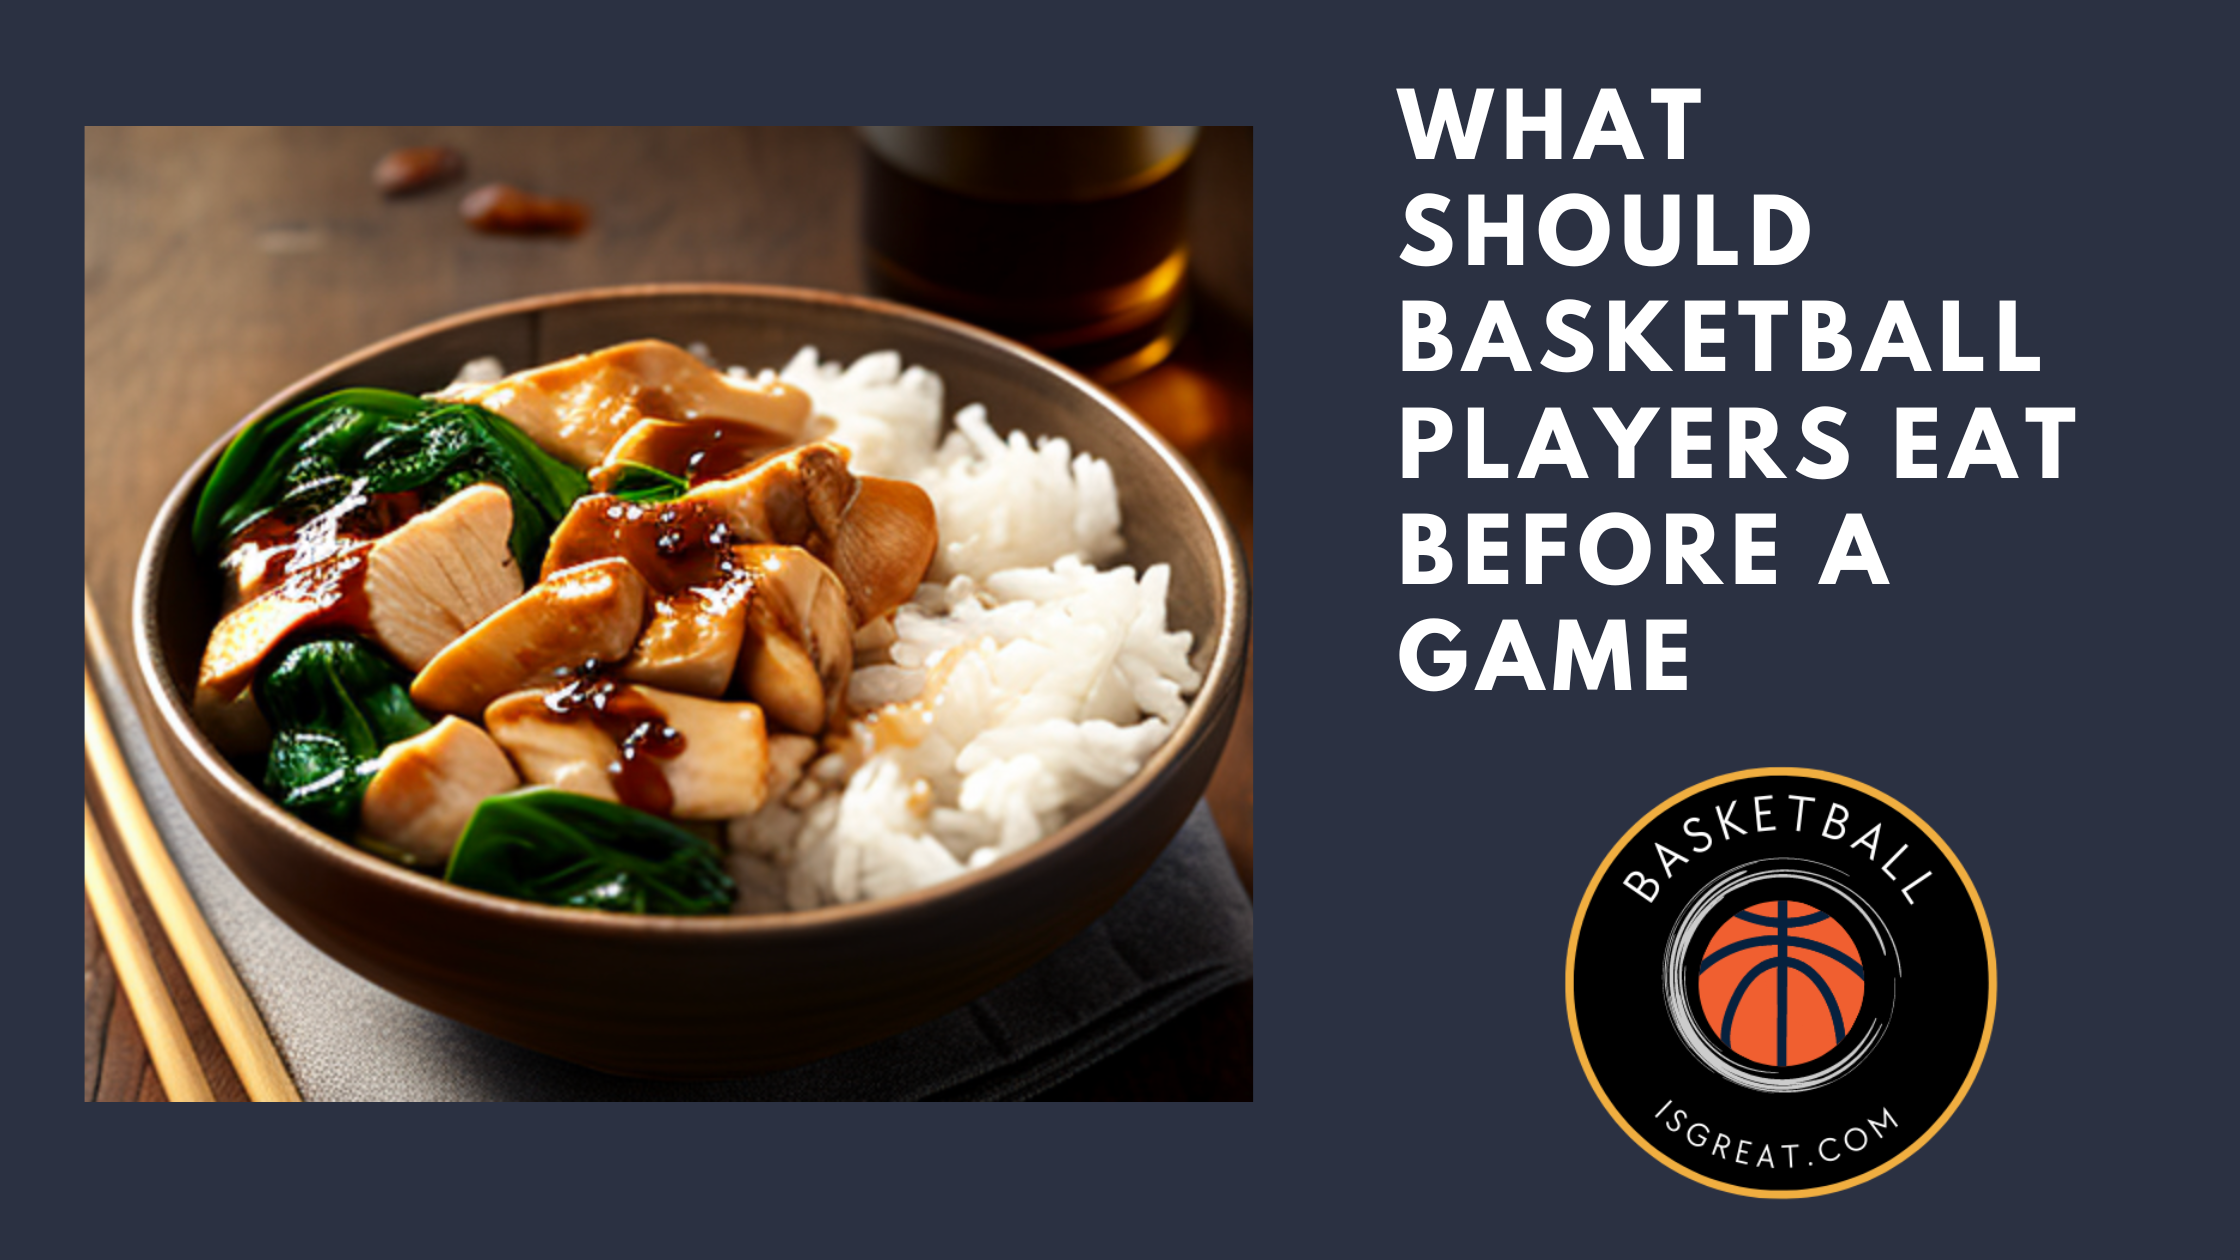 What Should Basketball Players Eat Before a Game?